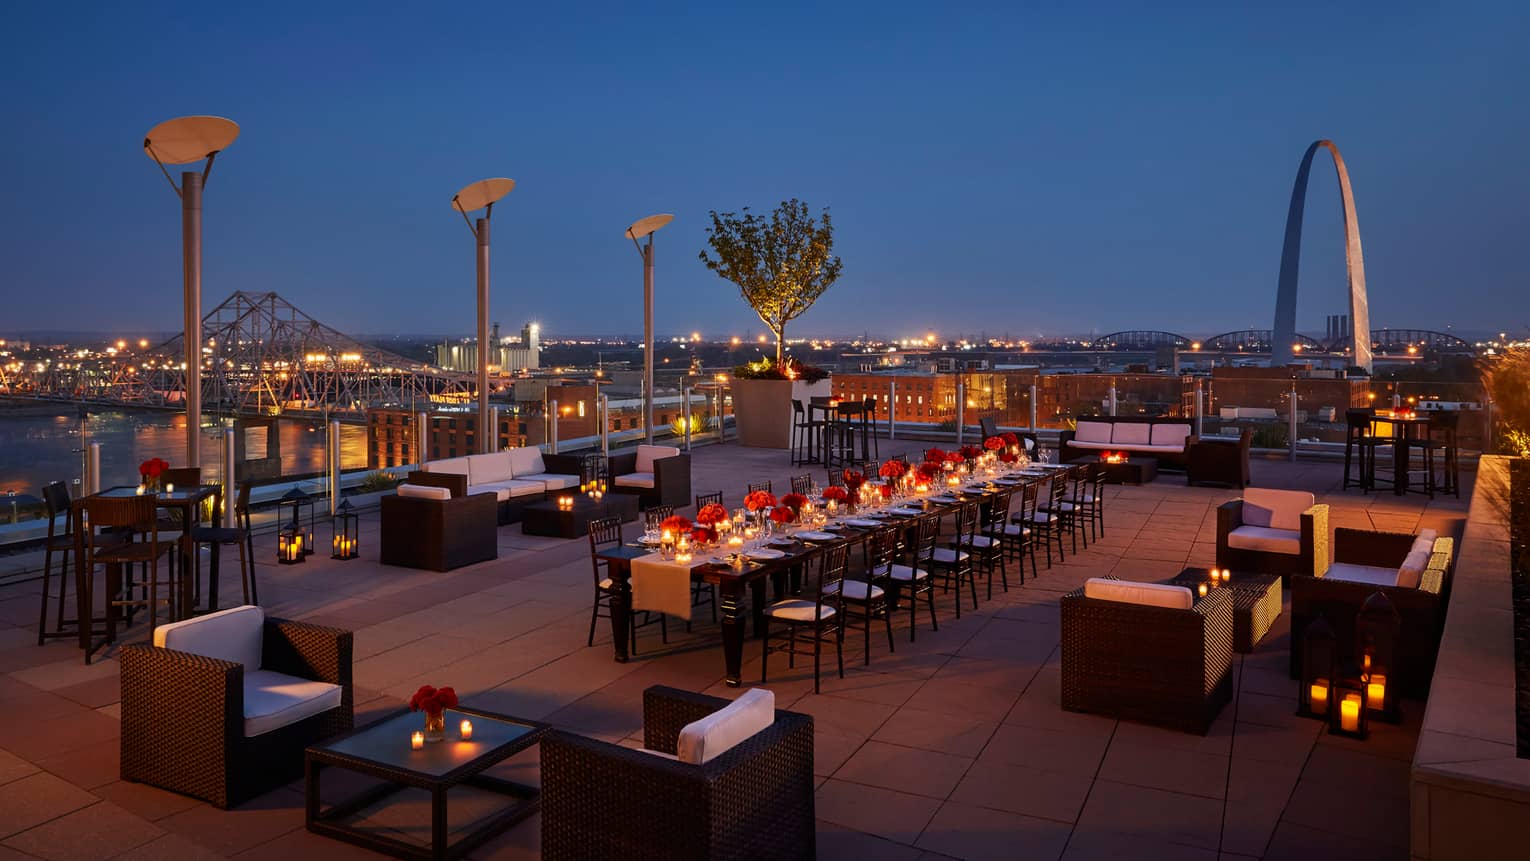 Aerial view of rooftop patio at night with lounge chairs and long communal dining table with candles